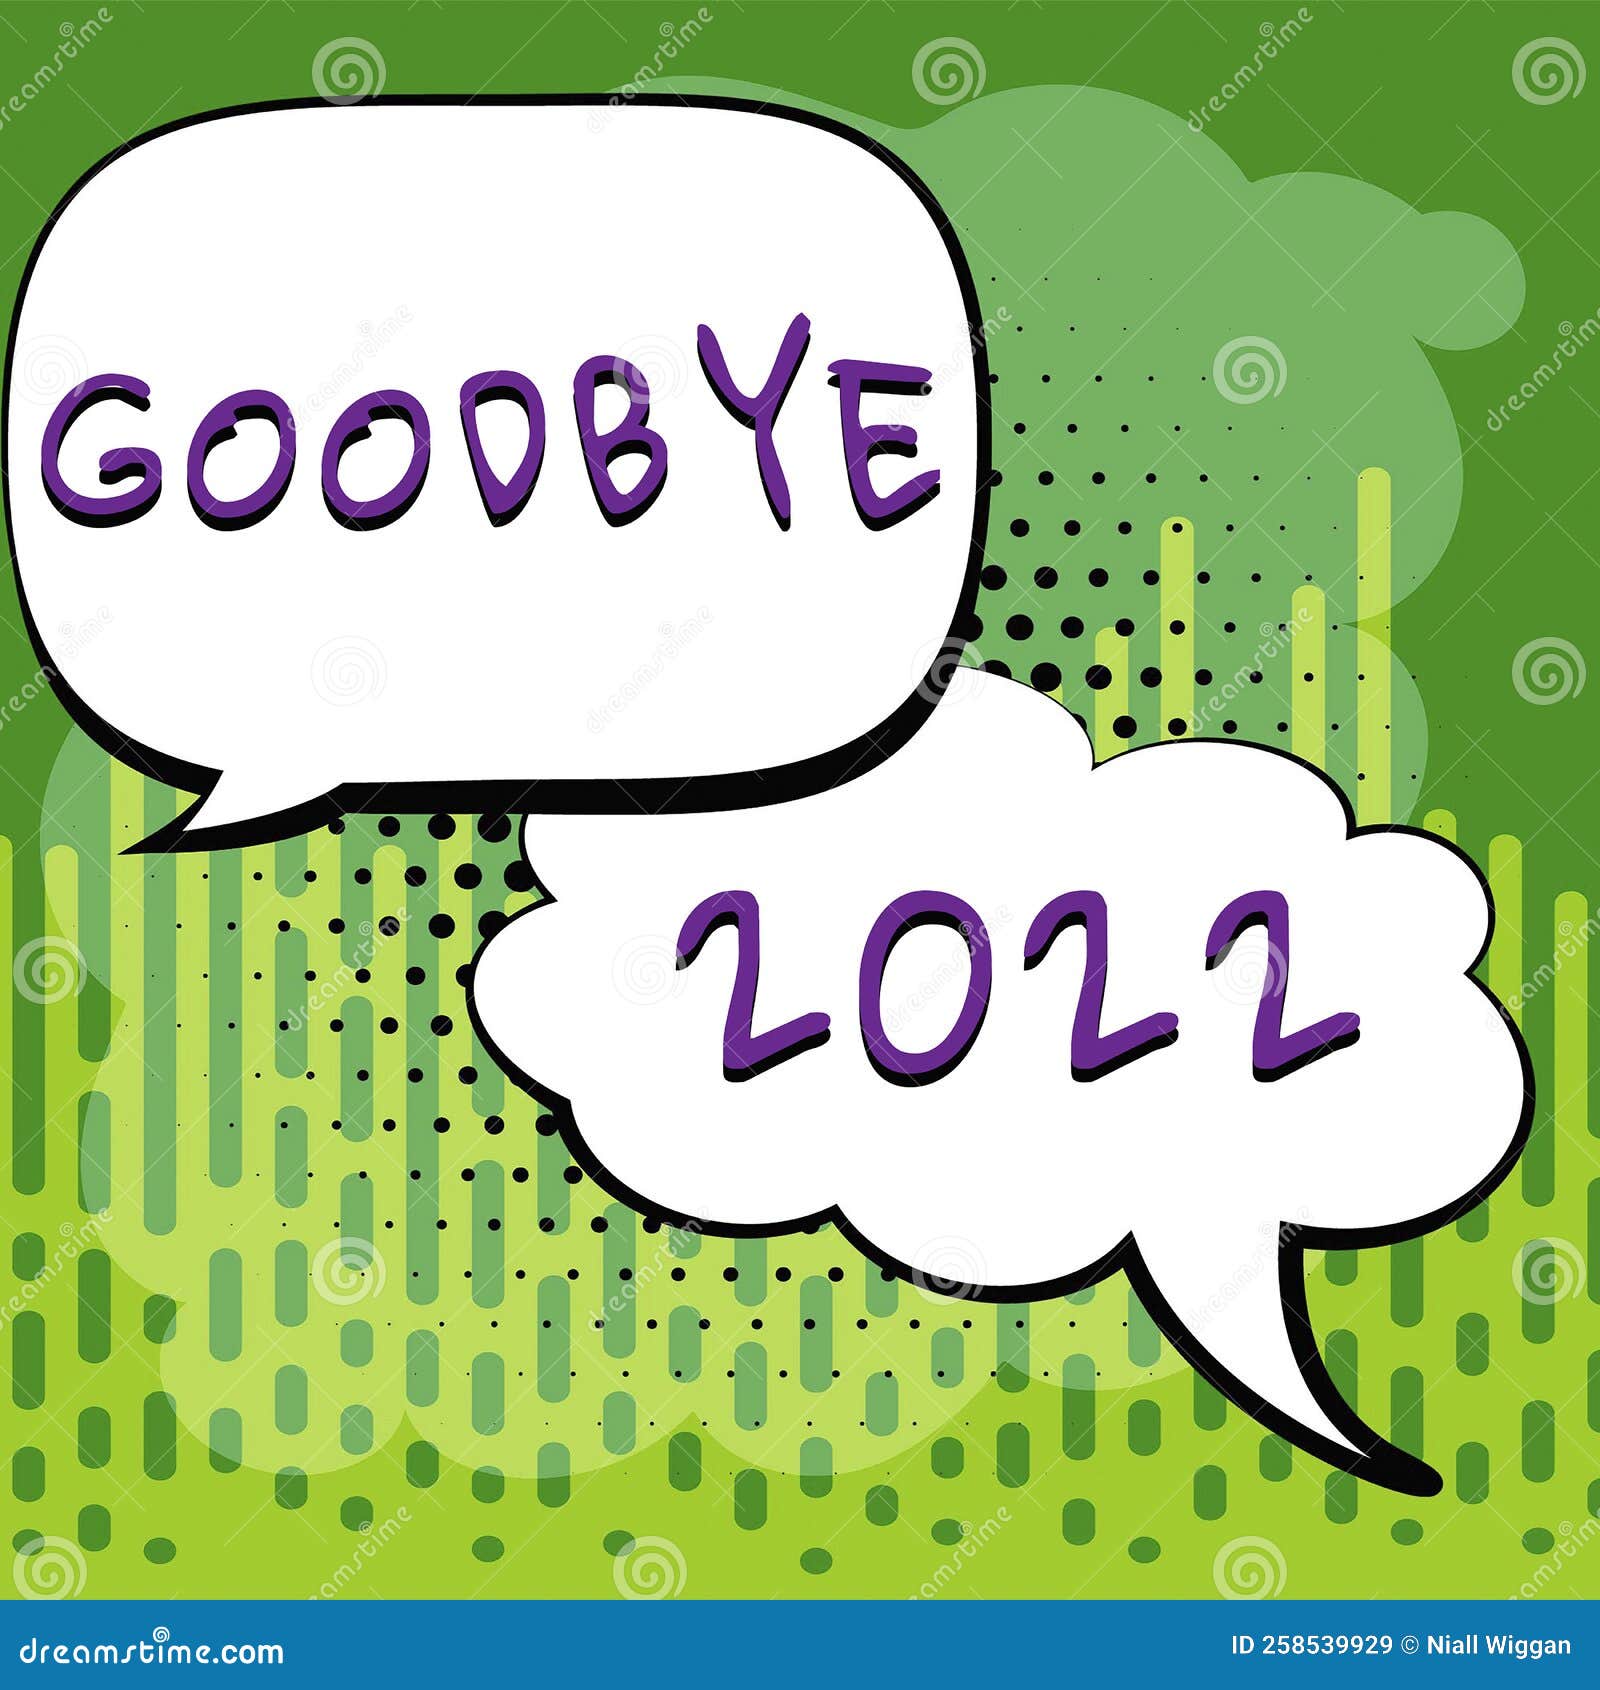 handwriting text goodbye 2022. word for new year eve milestone last month celebration transition